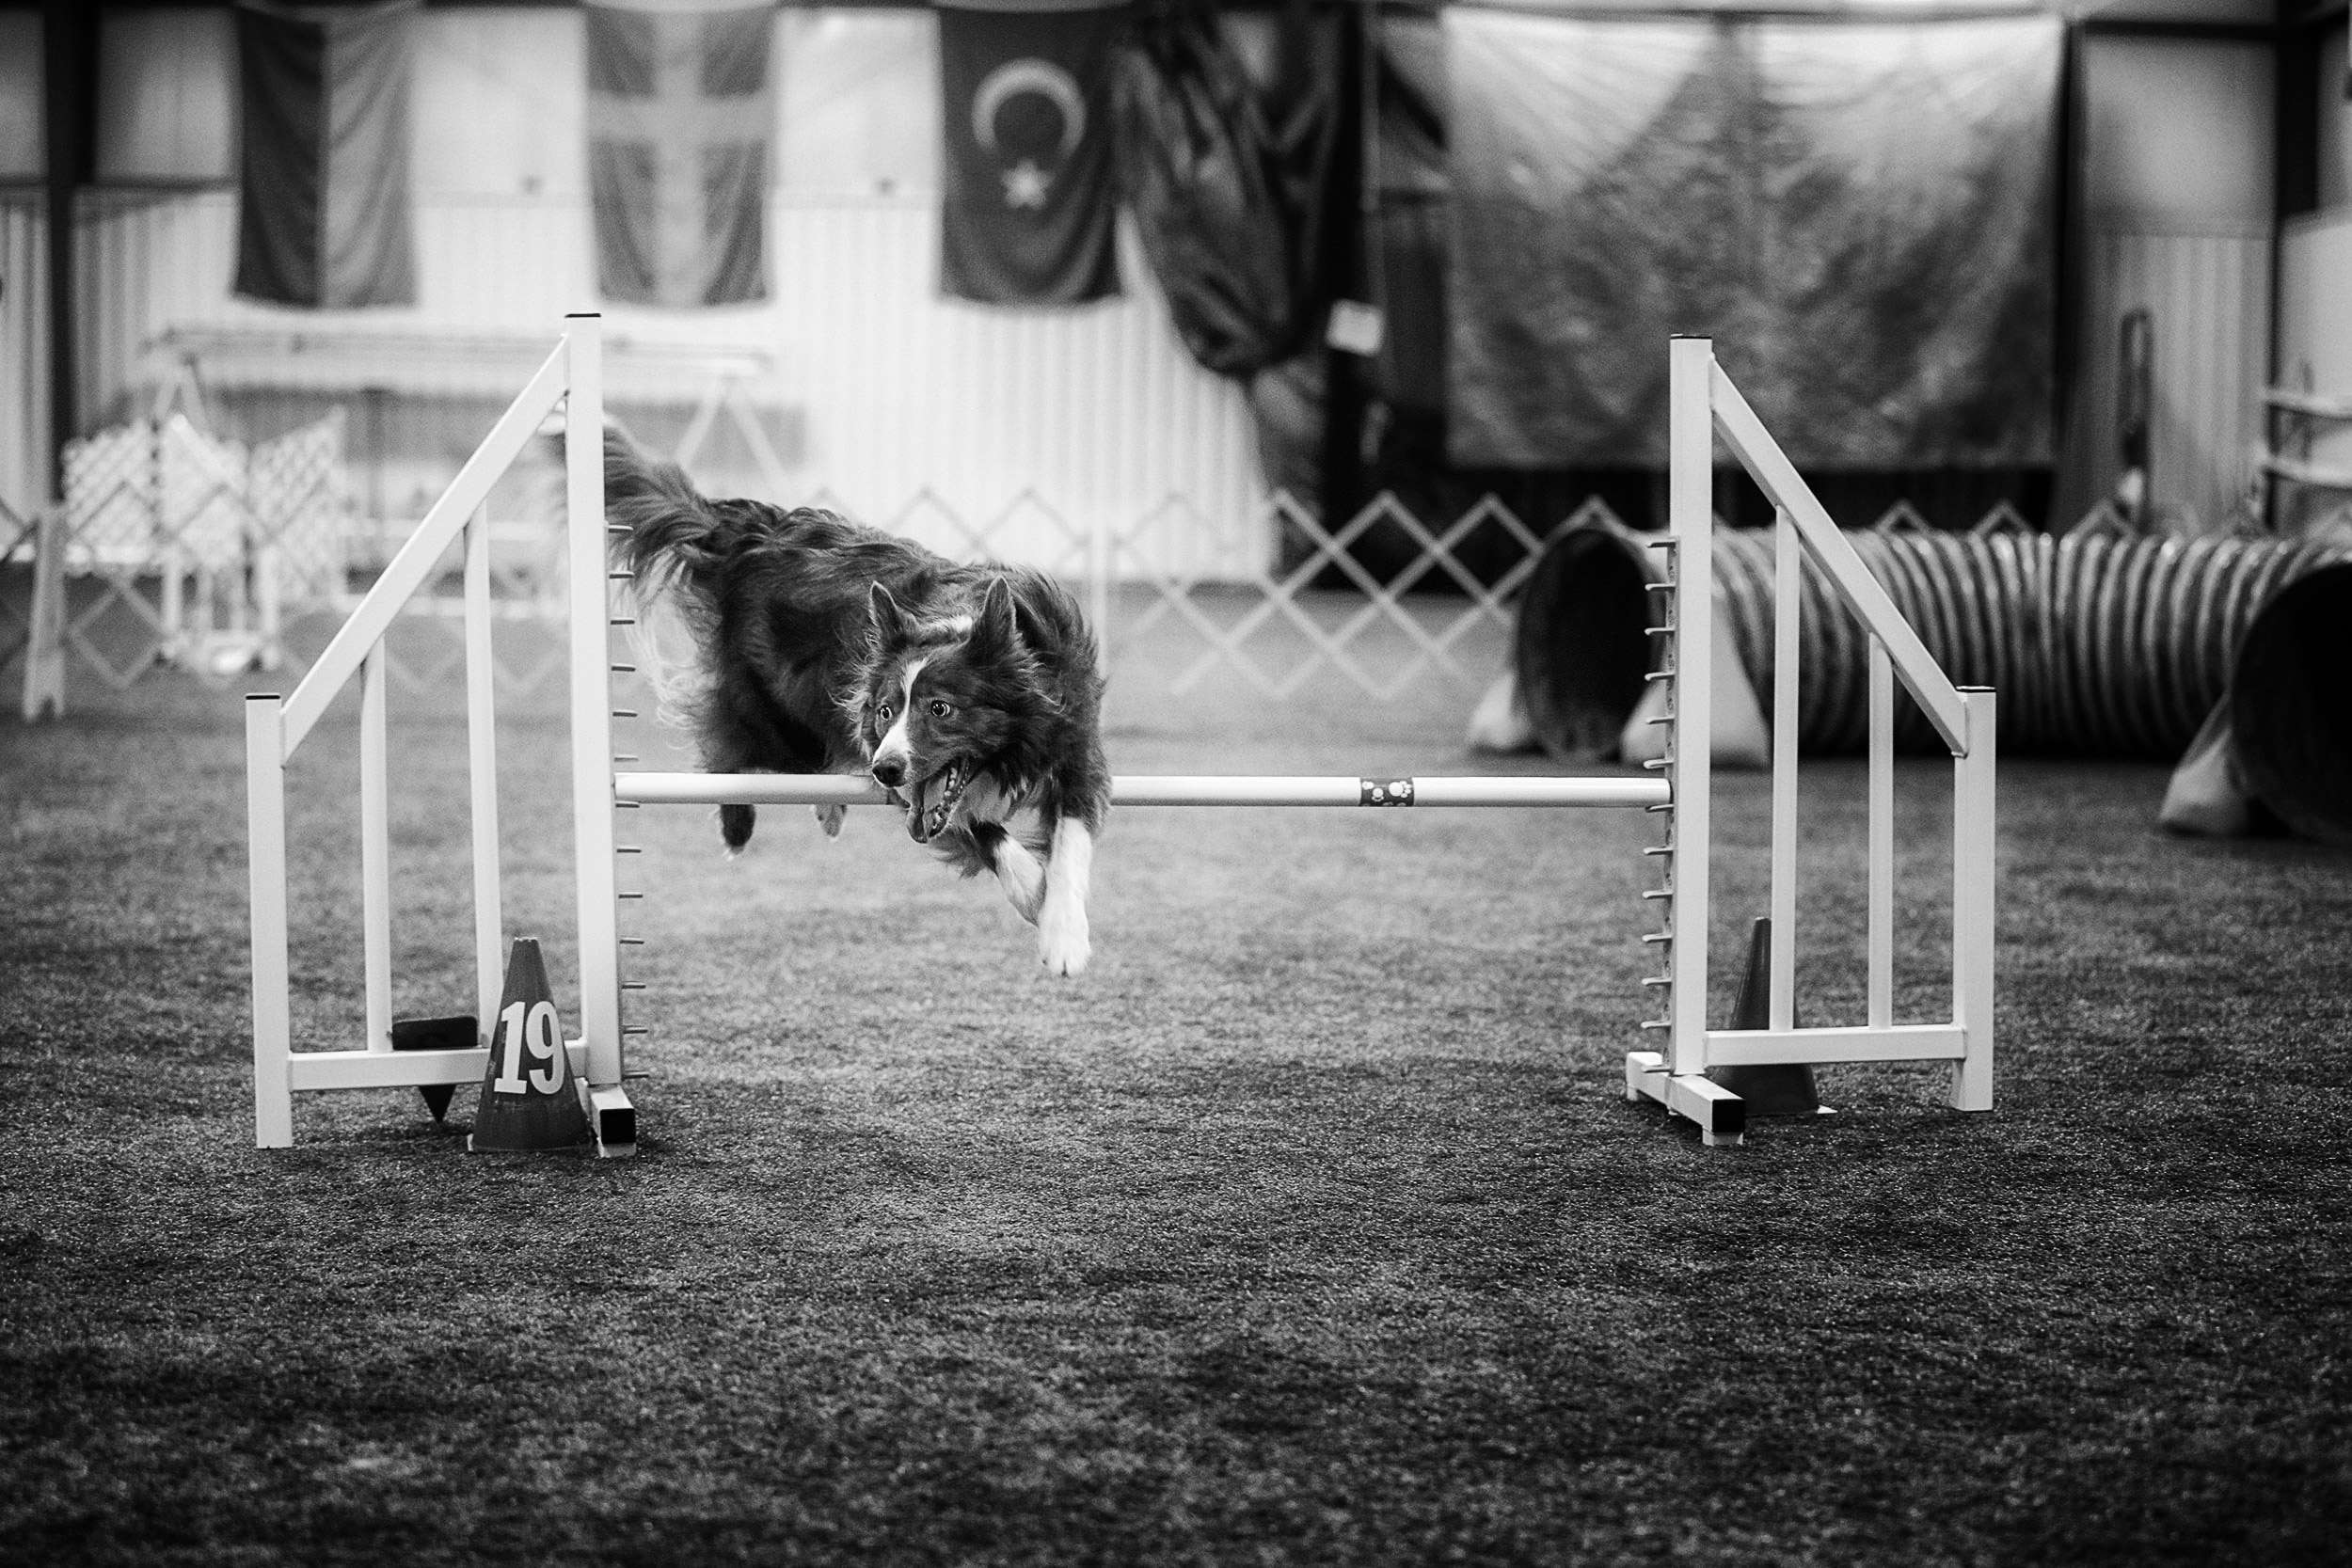 Border collie jumping. Livestock and agriculture photography